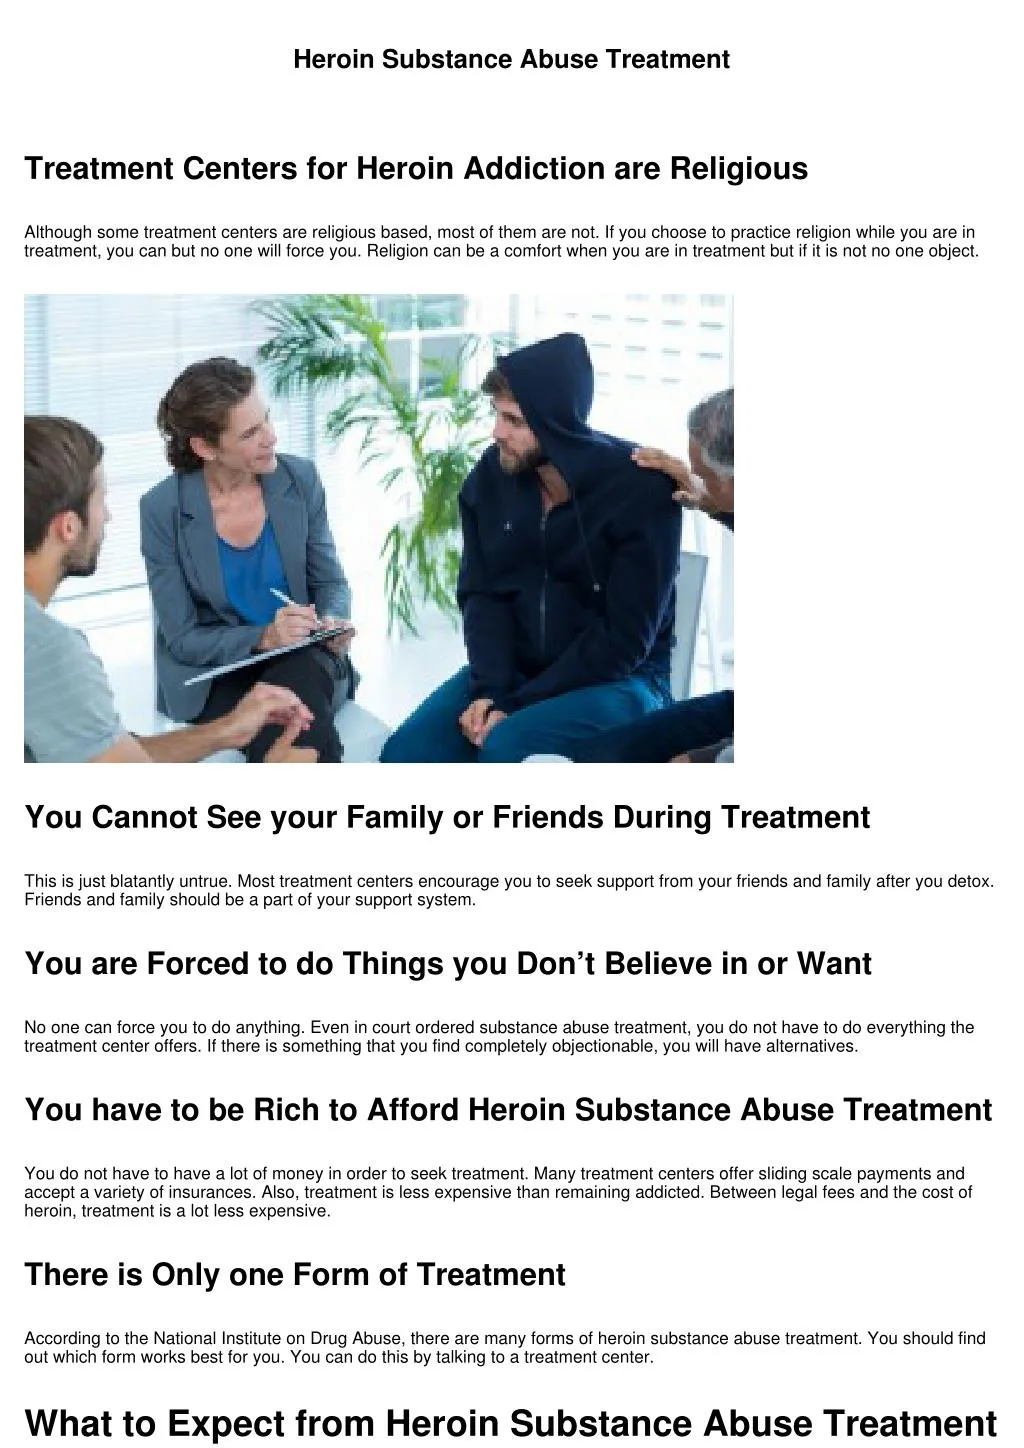 heroin substance abuse treatment n.